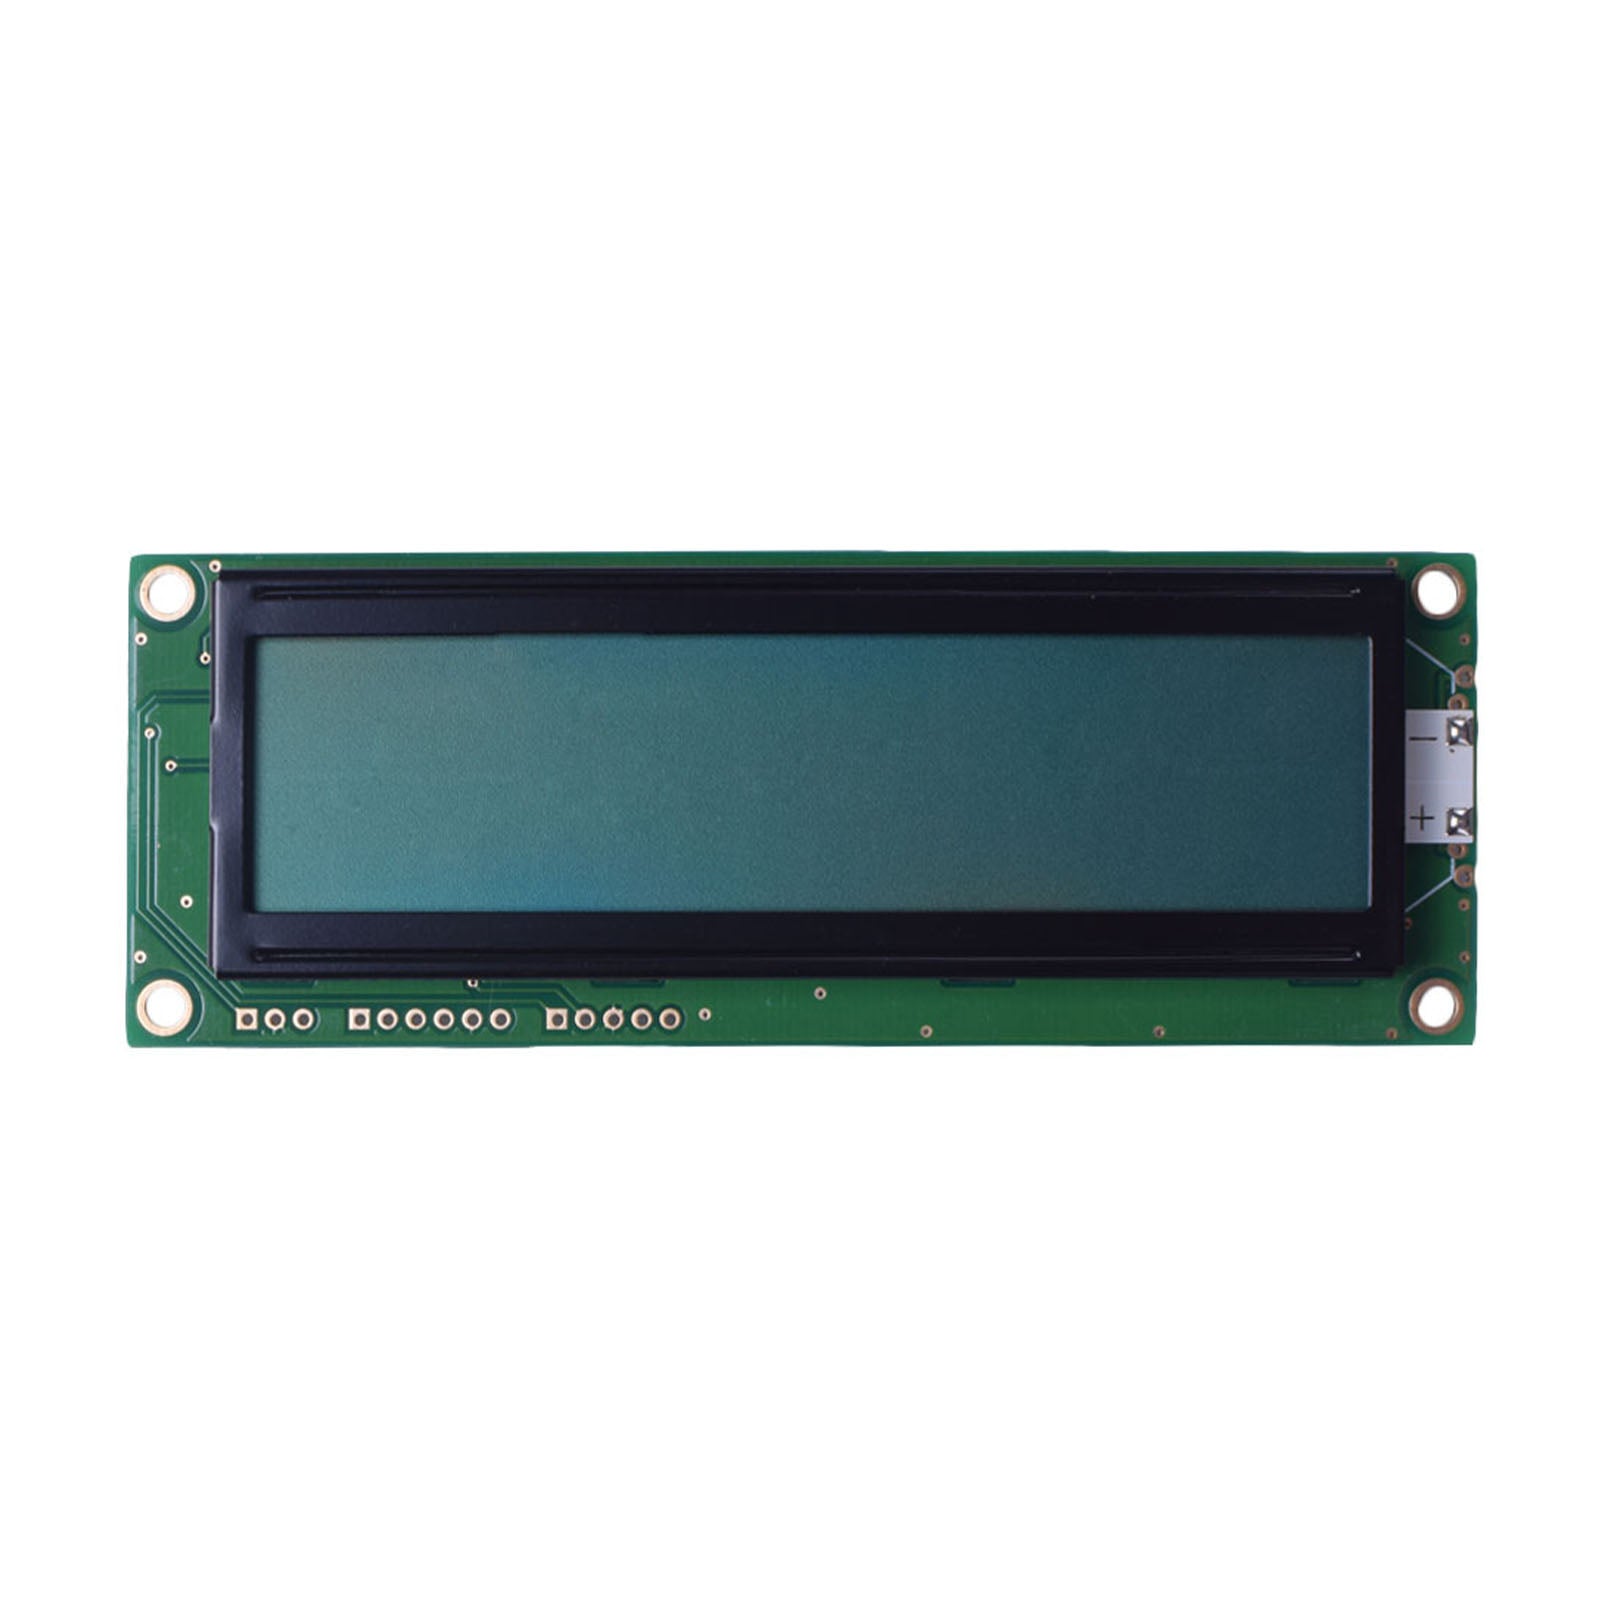 DisplayModule 16x2 Large Gray Character LCD - RS232, I2C, SPI